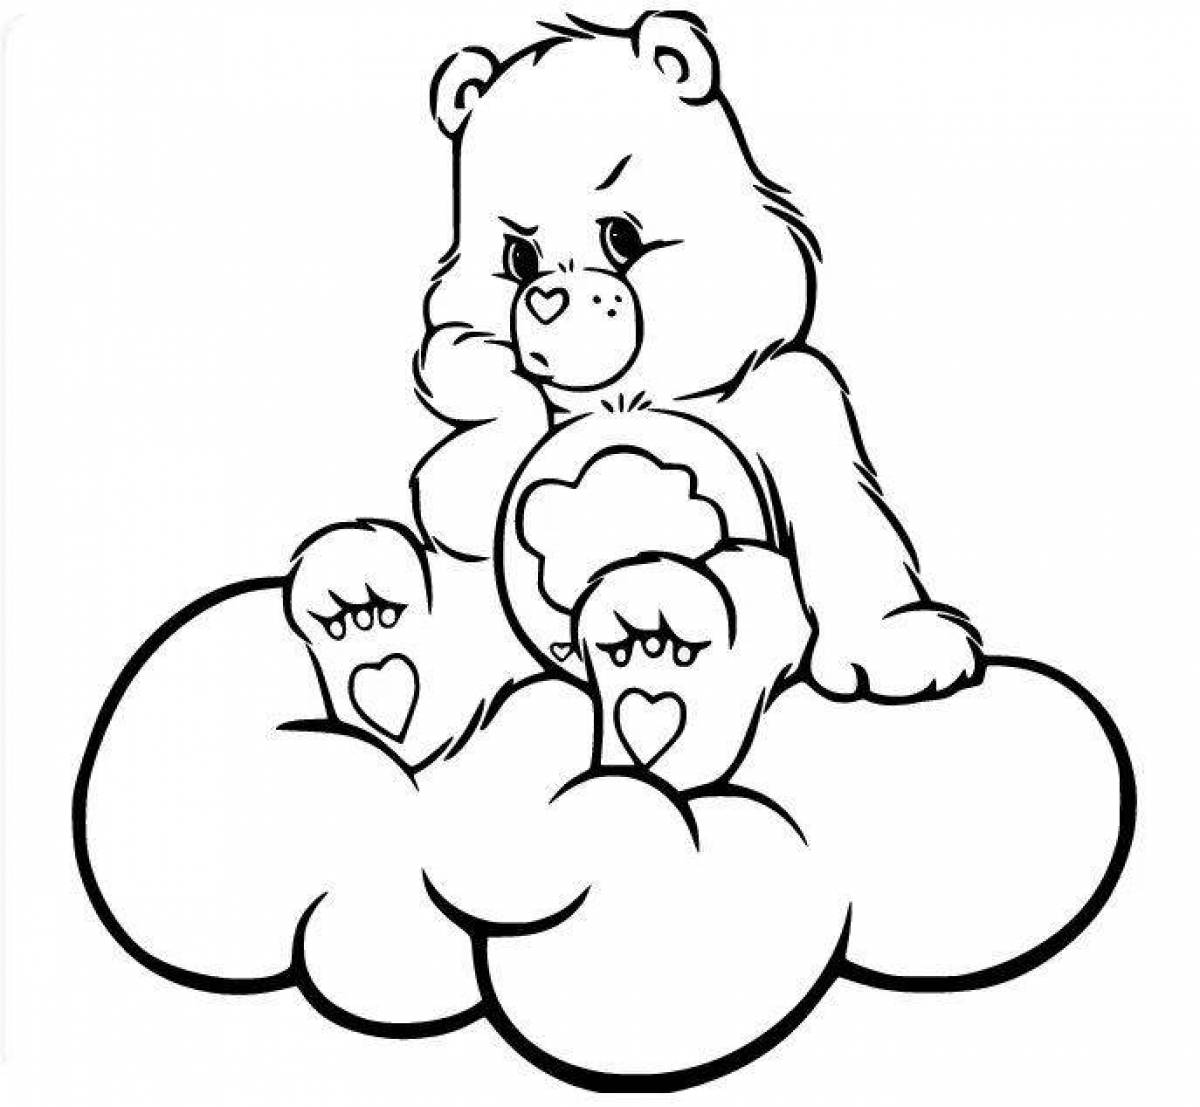 Cute and funny bear coloring book